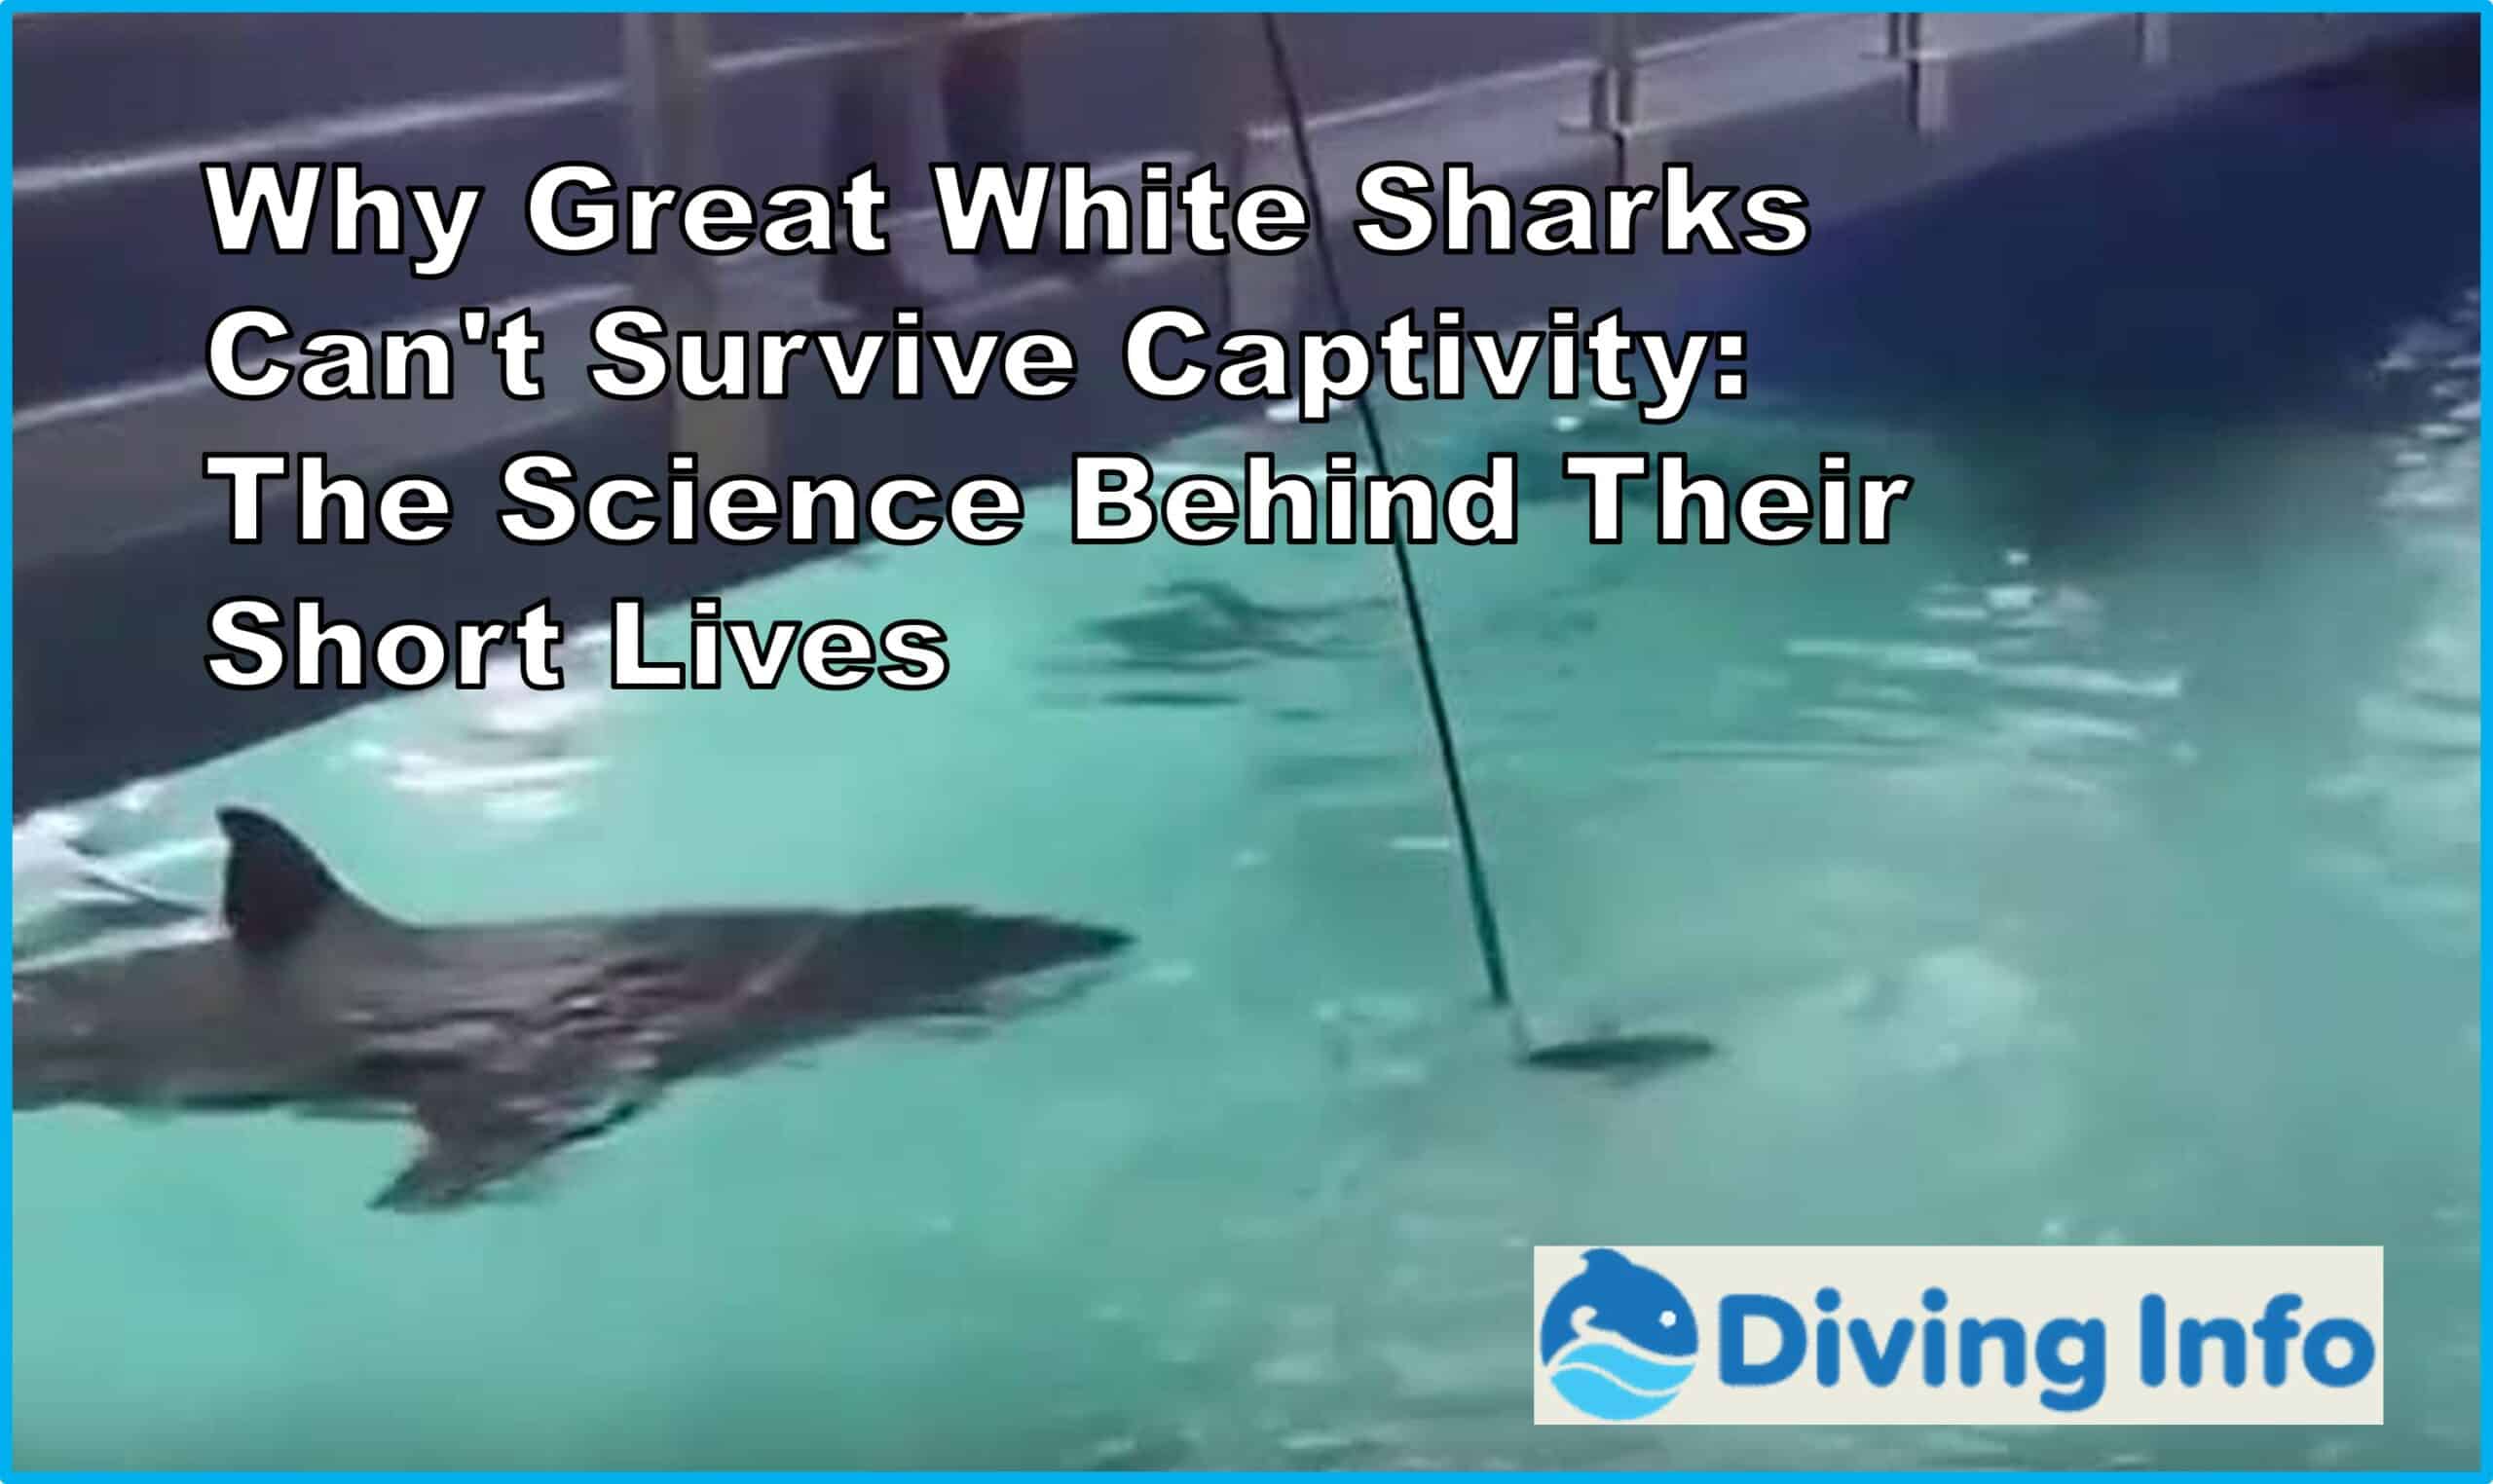 Why Great White Sharks Can't Survive Captivity The Science Behind Their Short Lives